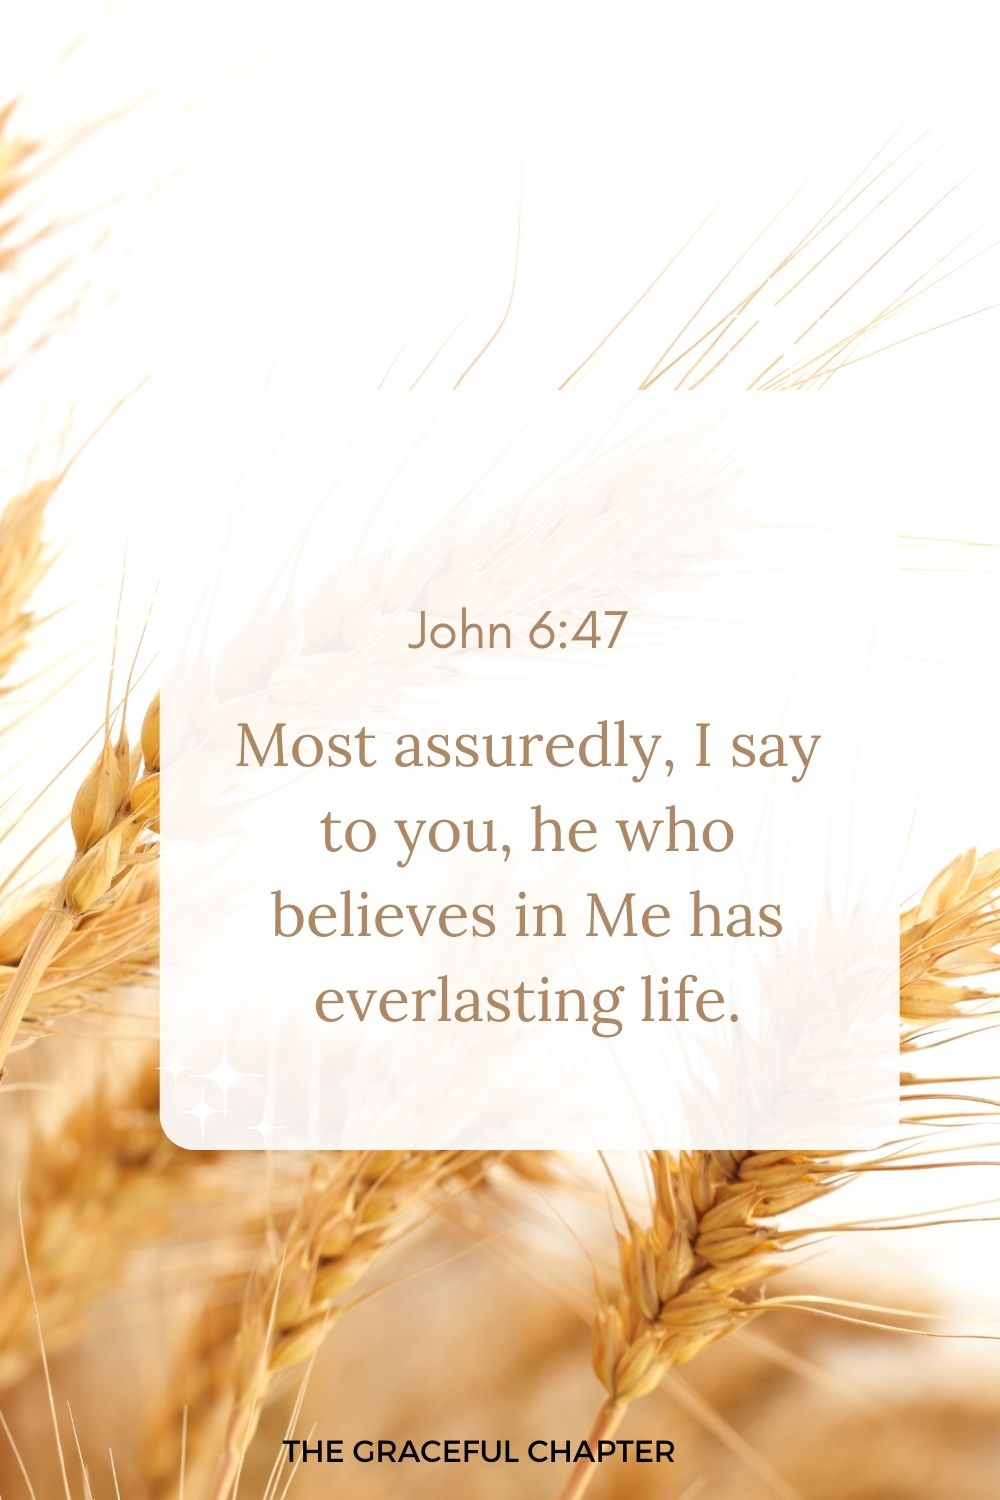 Most assuredly, I say to you, he who believes in Me has everlasting life. John 6:47